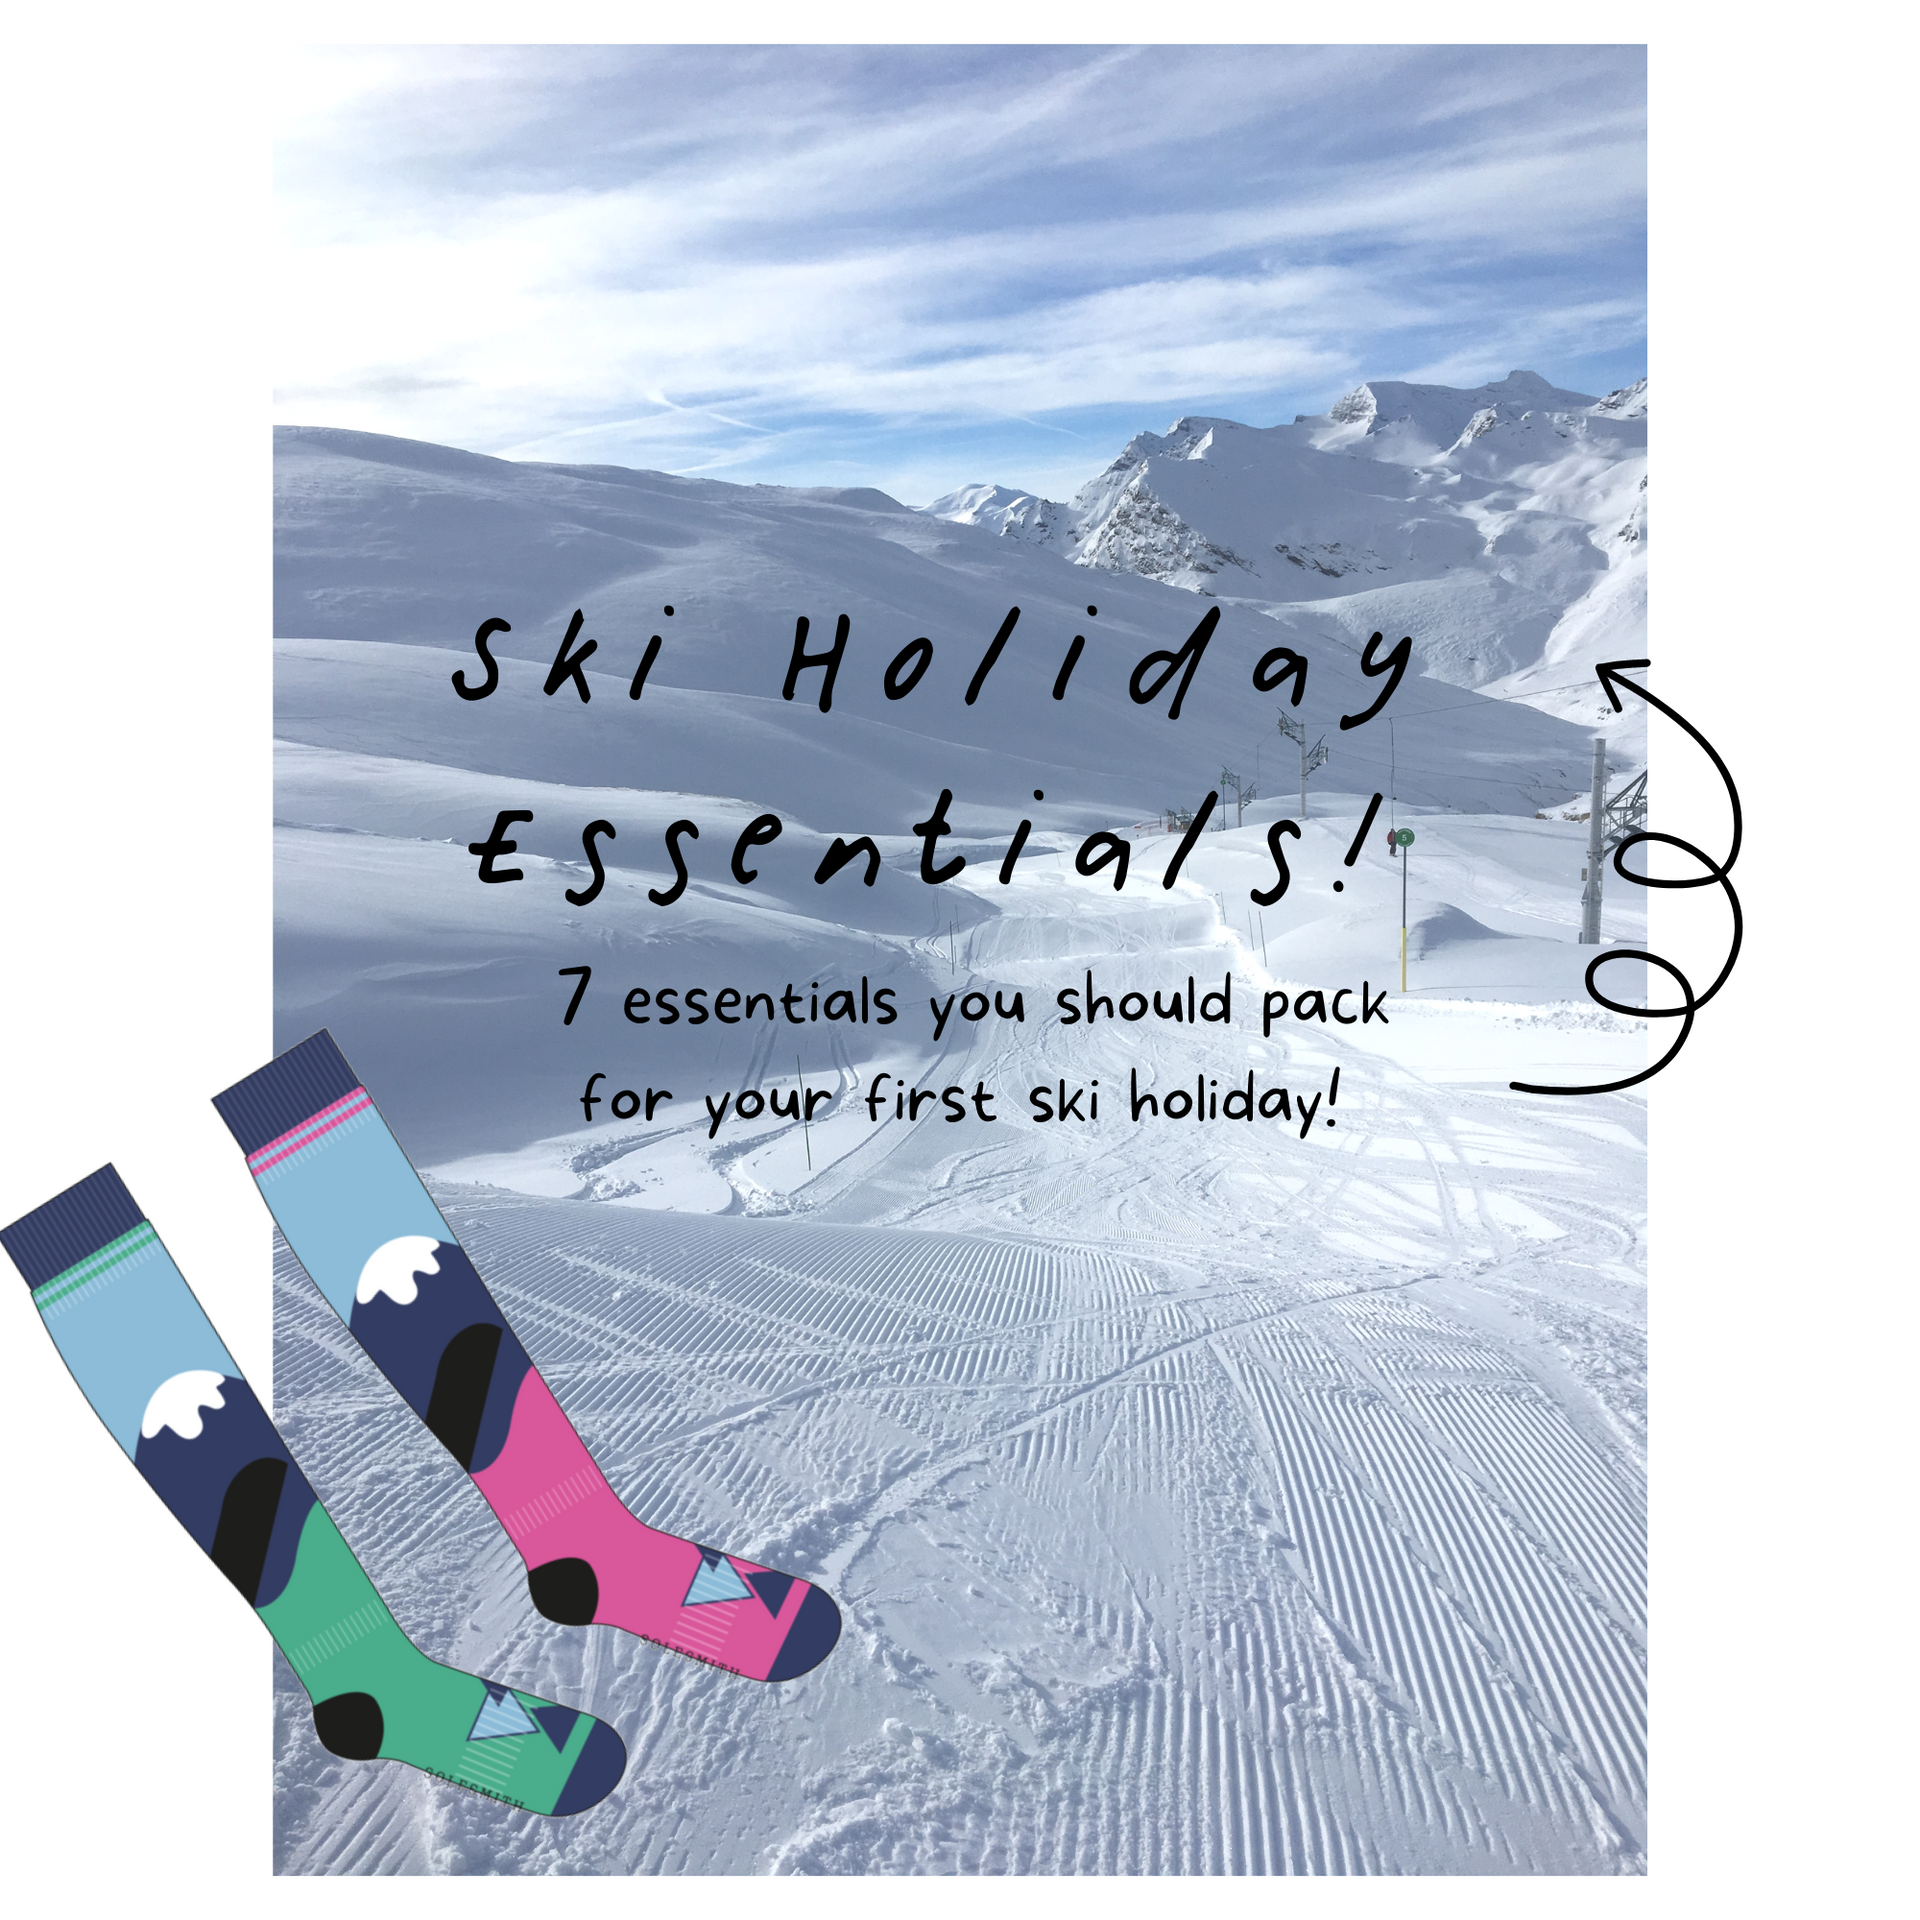 Our top 7 essentials you should pack for your first ski holiday